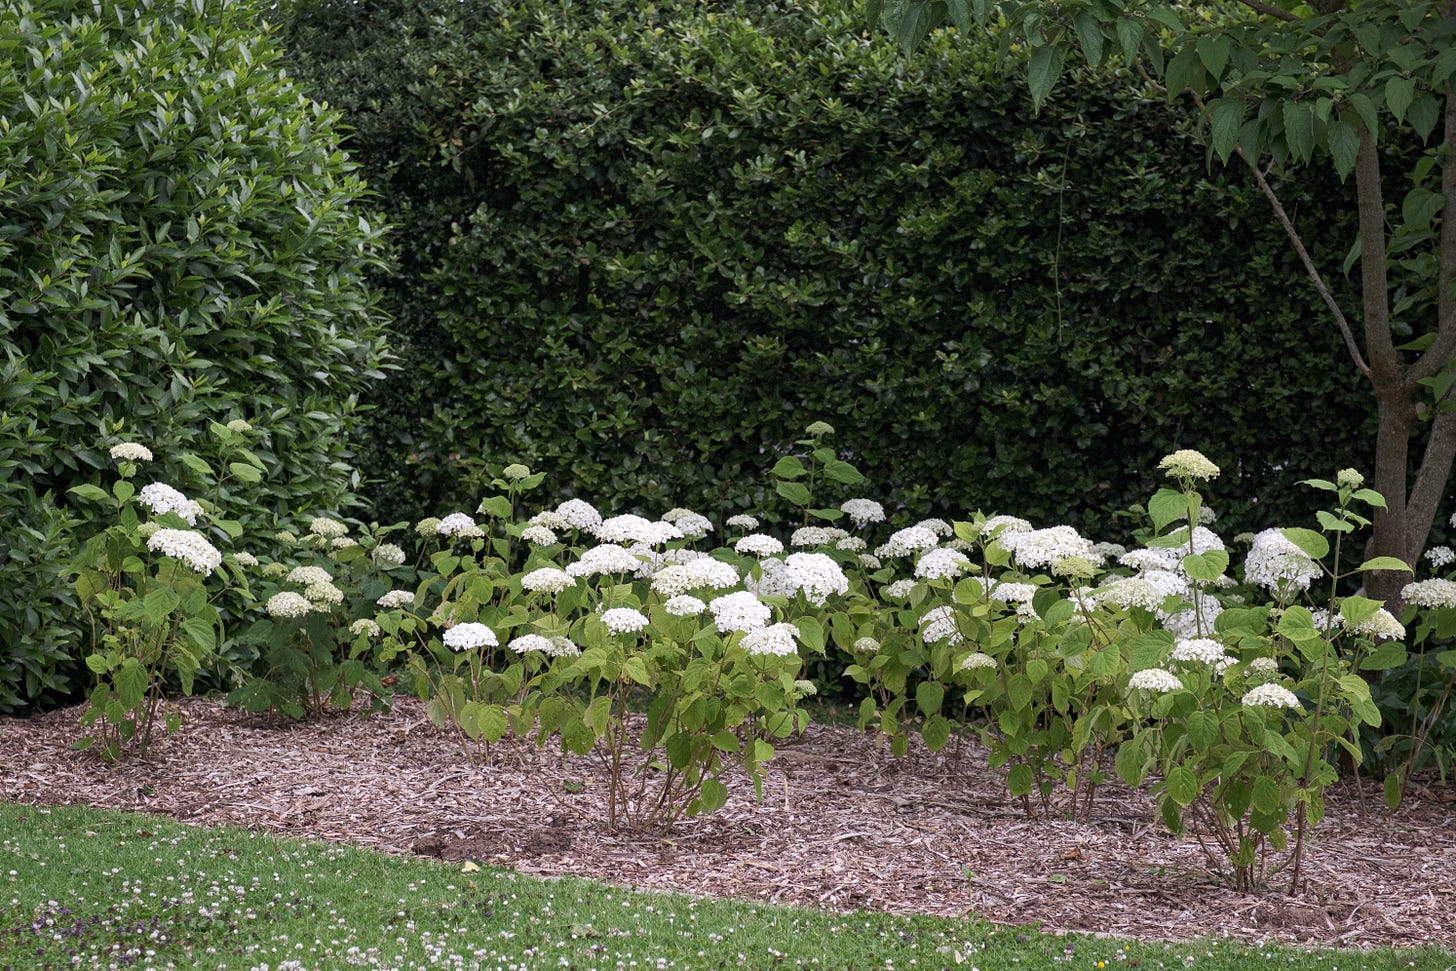 A garden border of white hydrangeas in flower, in front of a holm oak hedge and next to a bay hedge